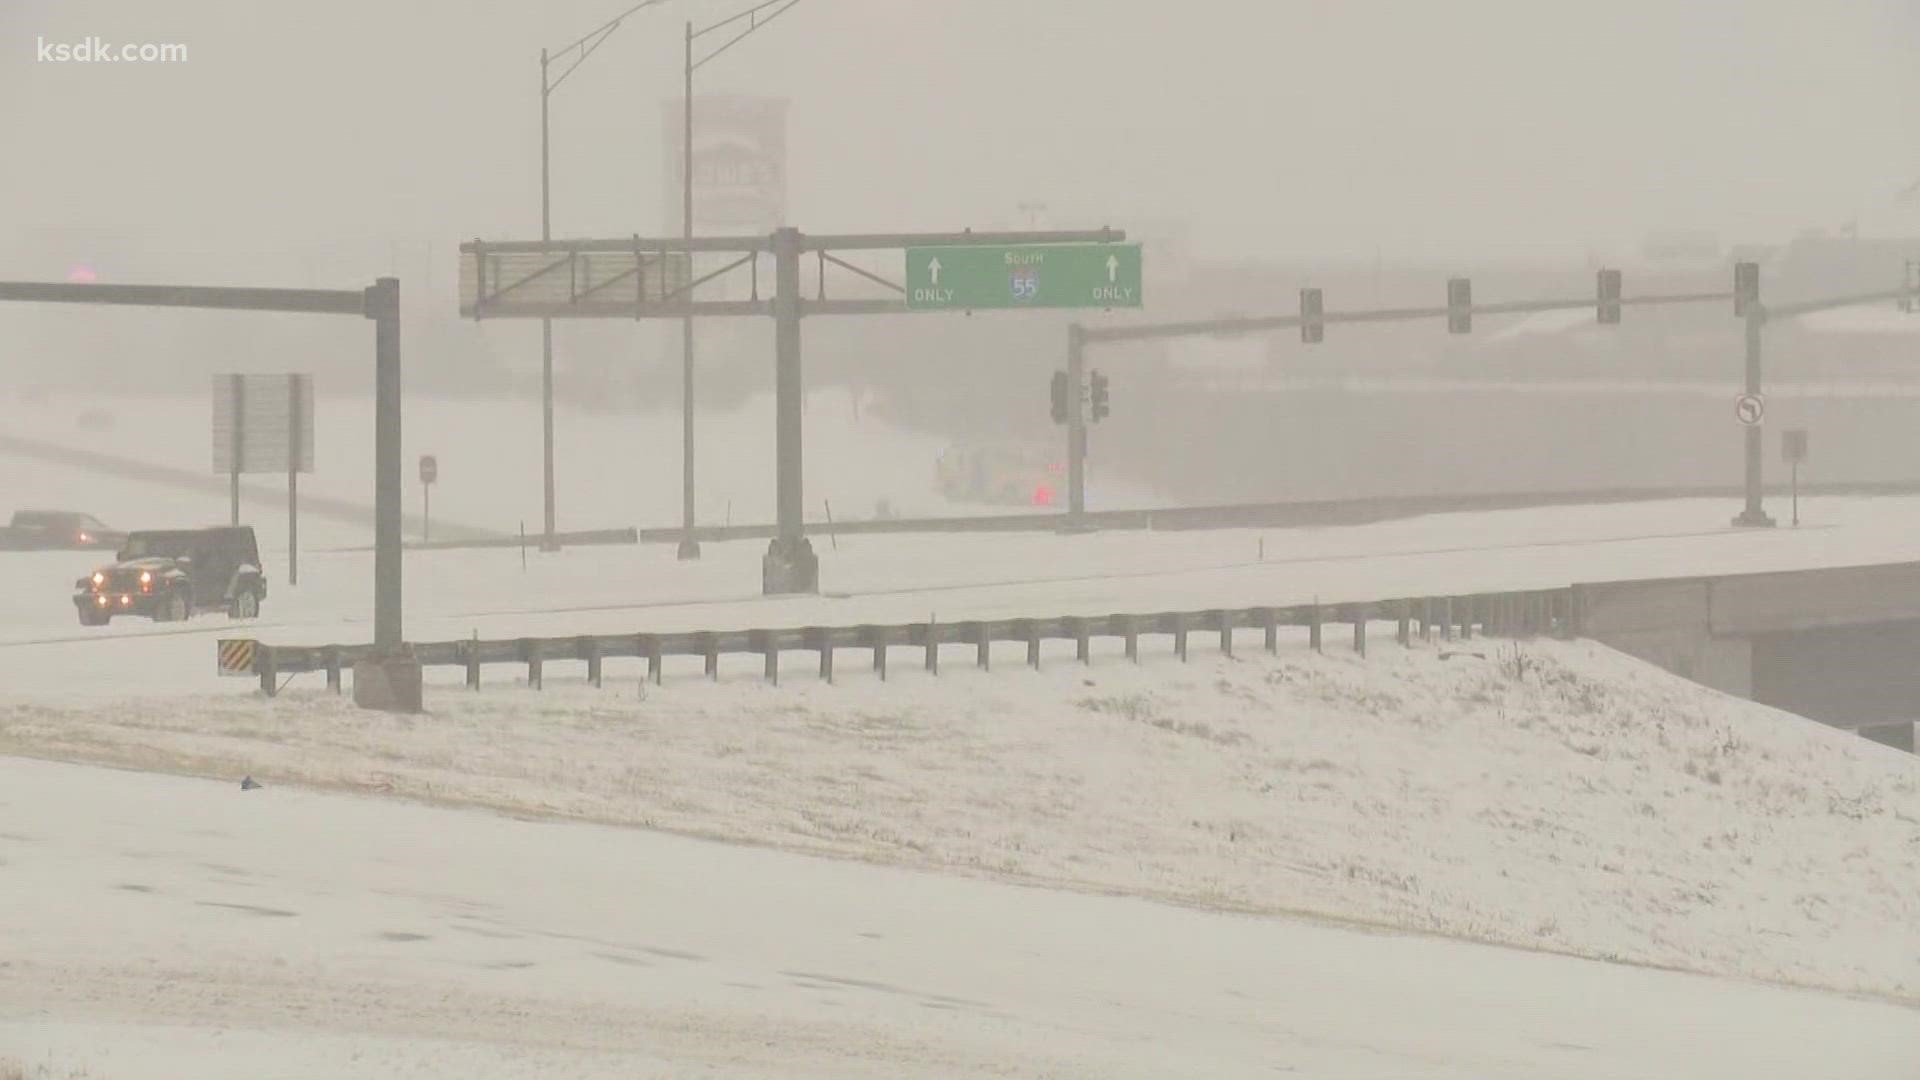 Snow has been falling for hours in Jefferson County, where road conditions are treacherous with piled-up snow.